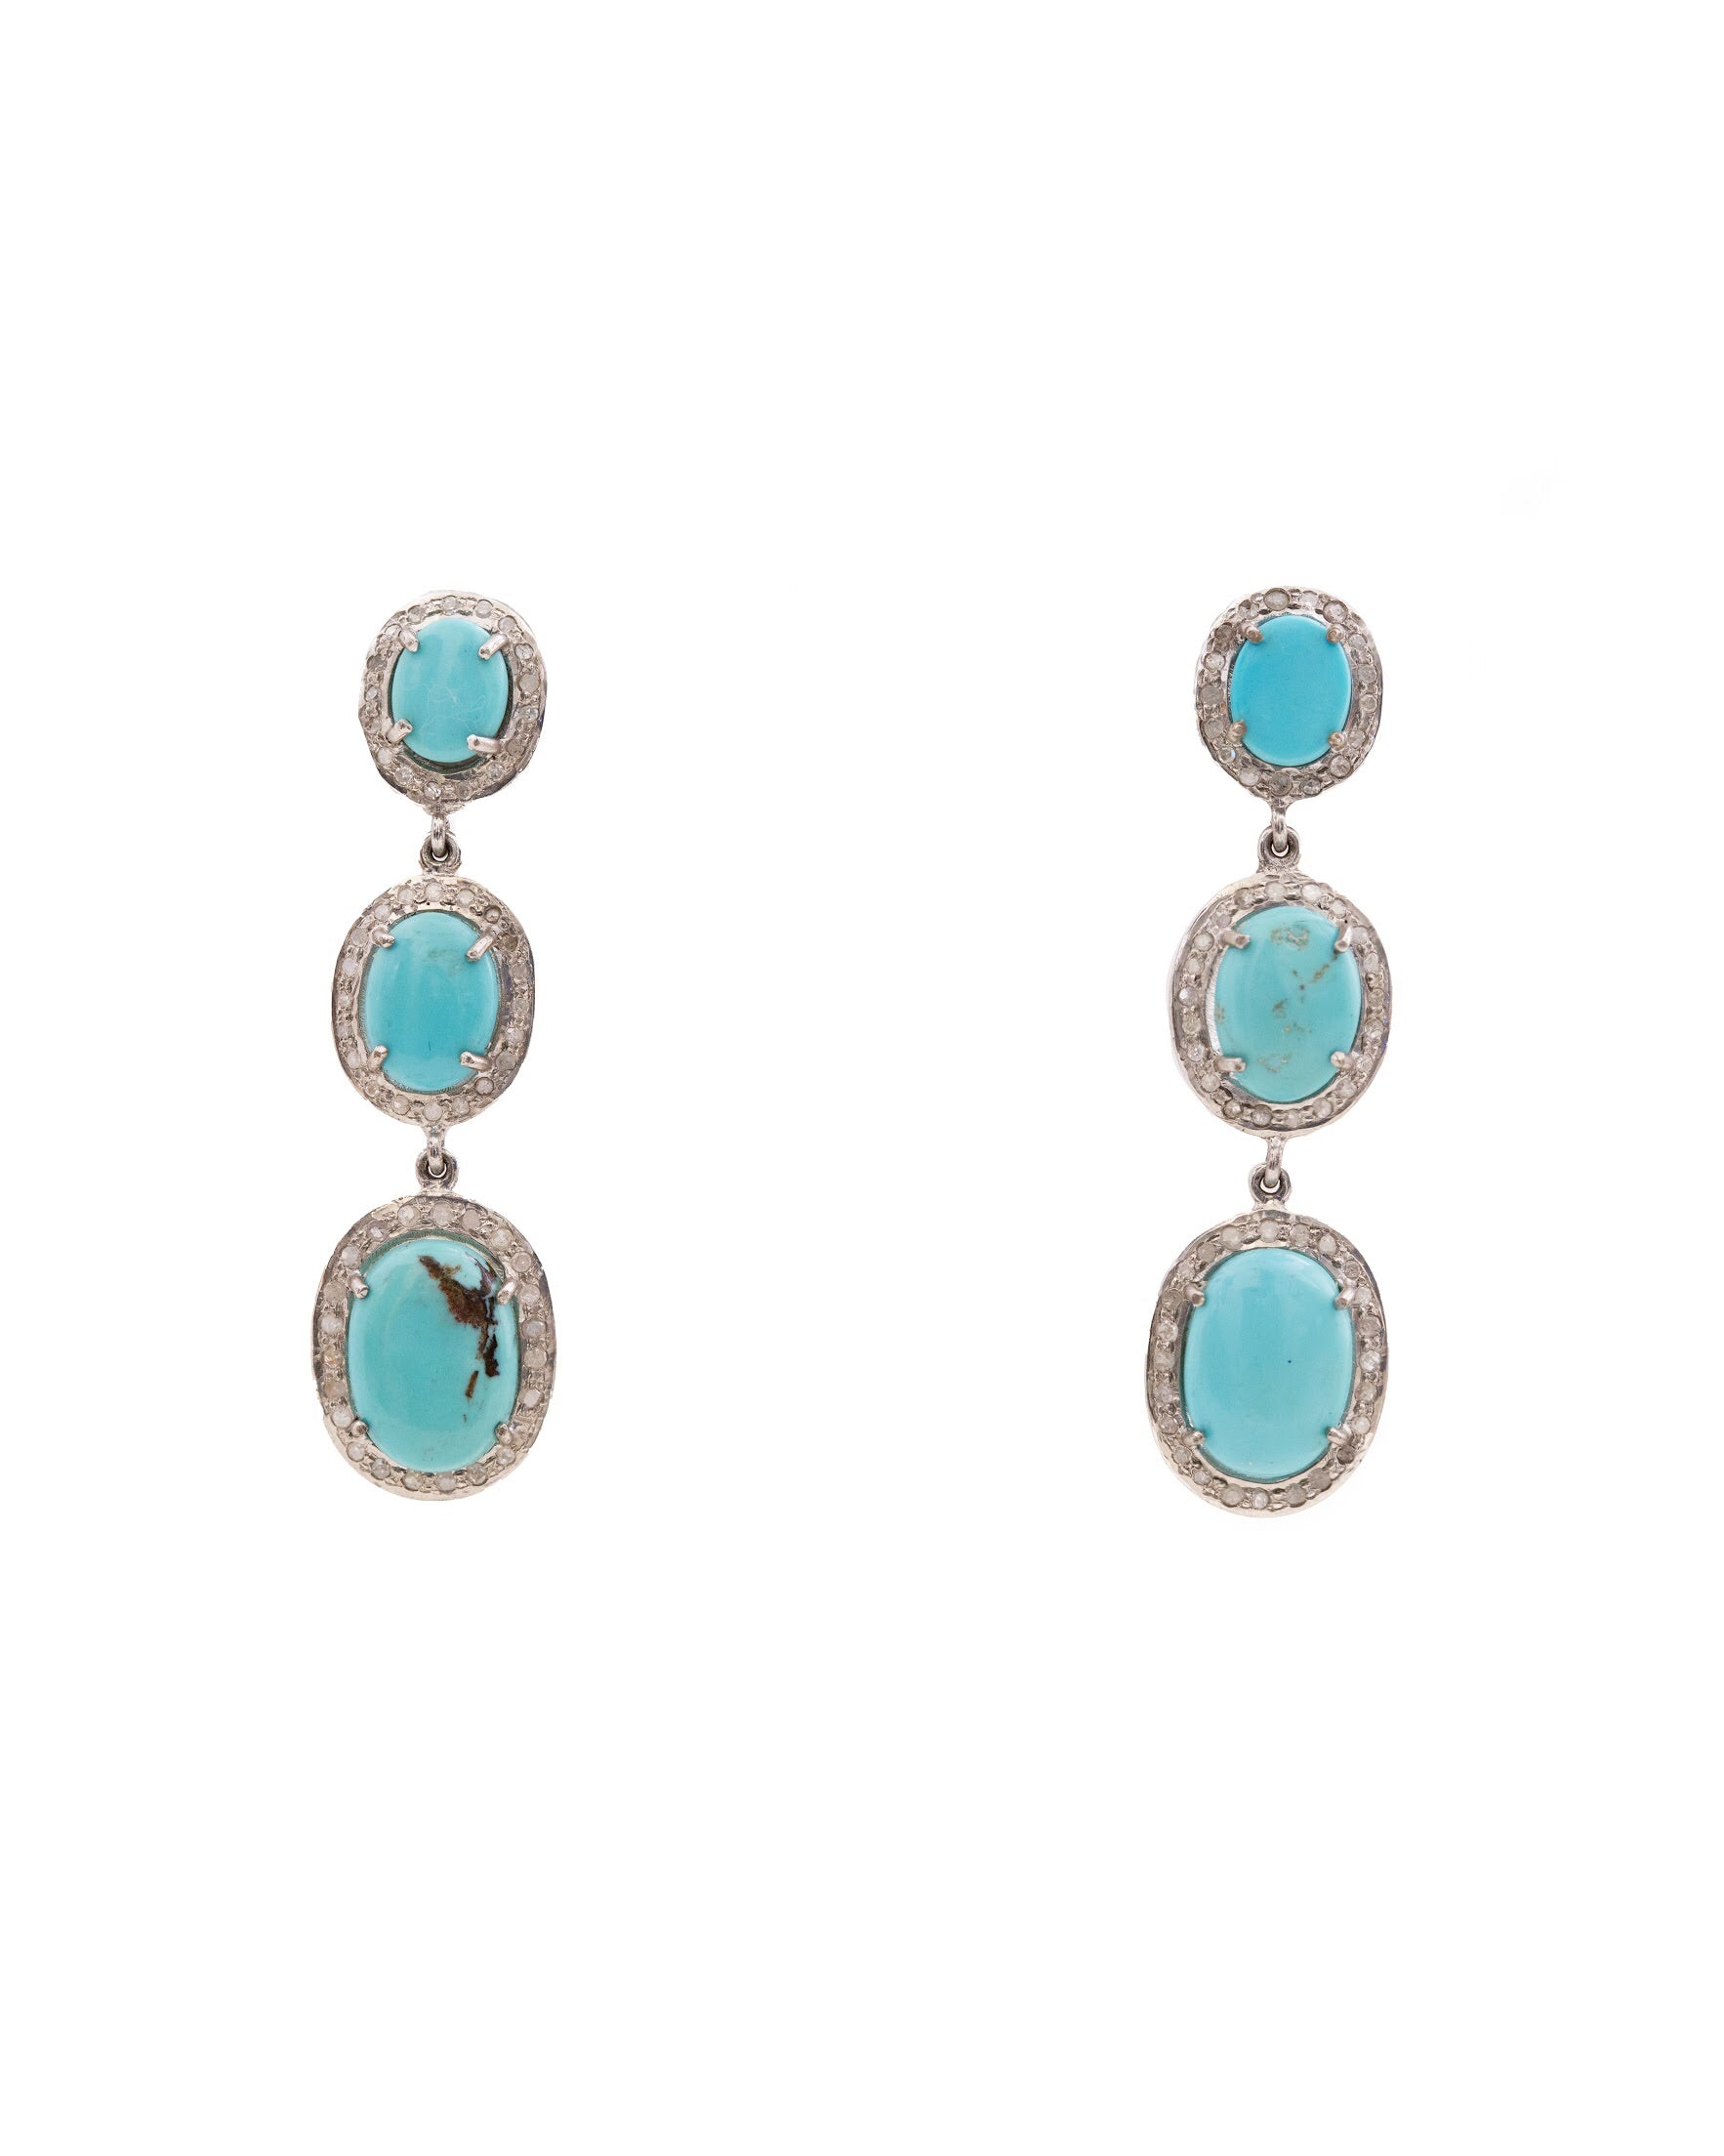 S.Row Designs Turquoise and Diamond Earrings